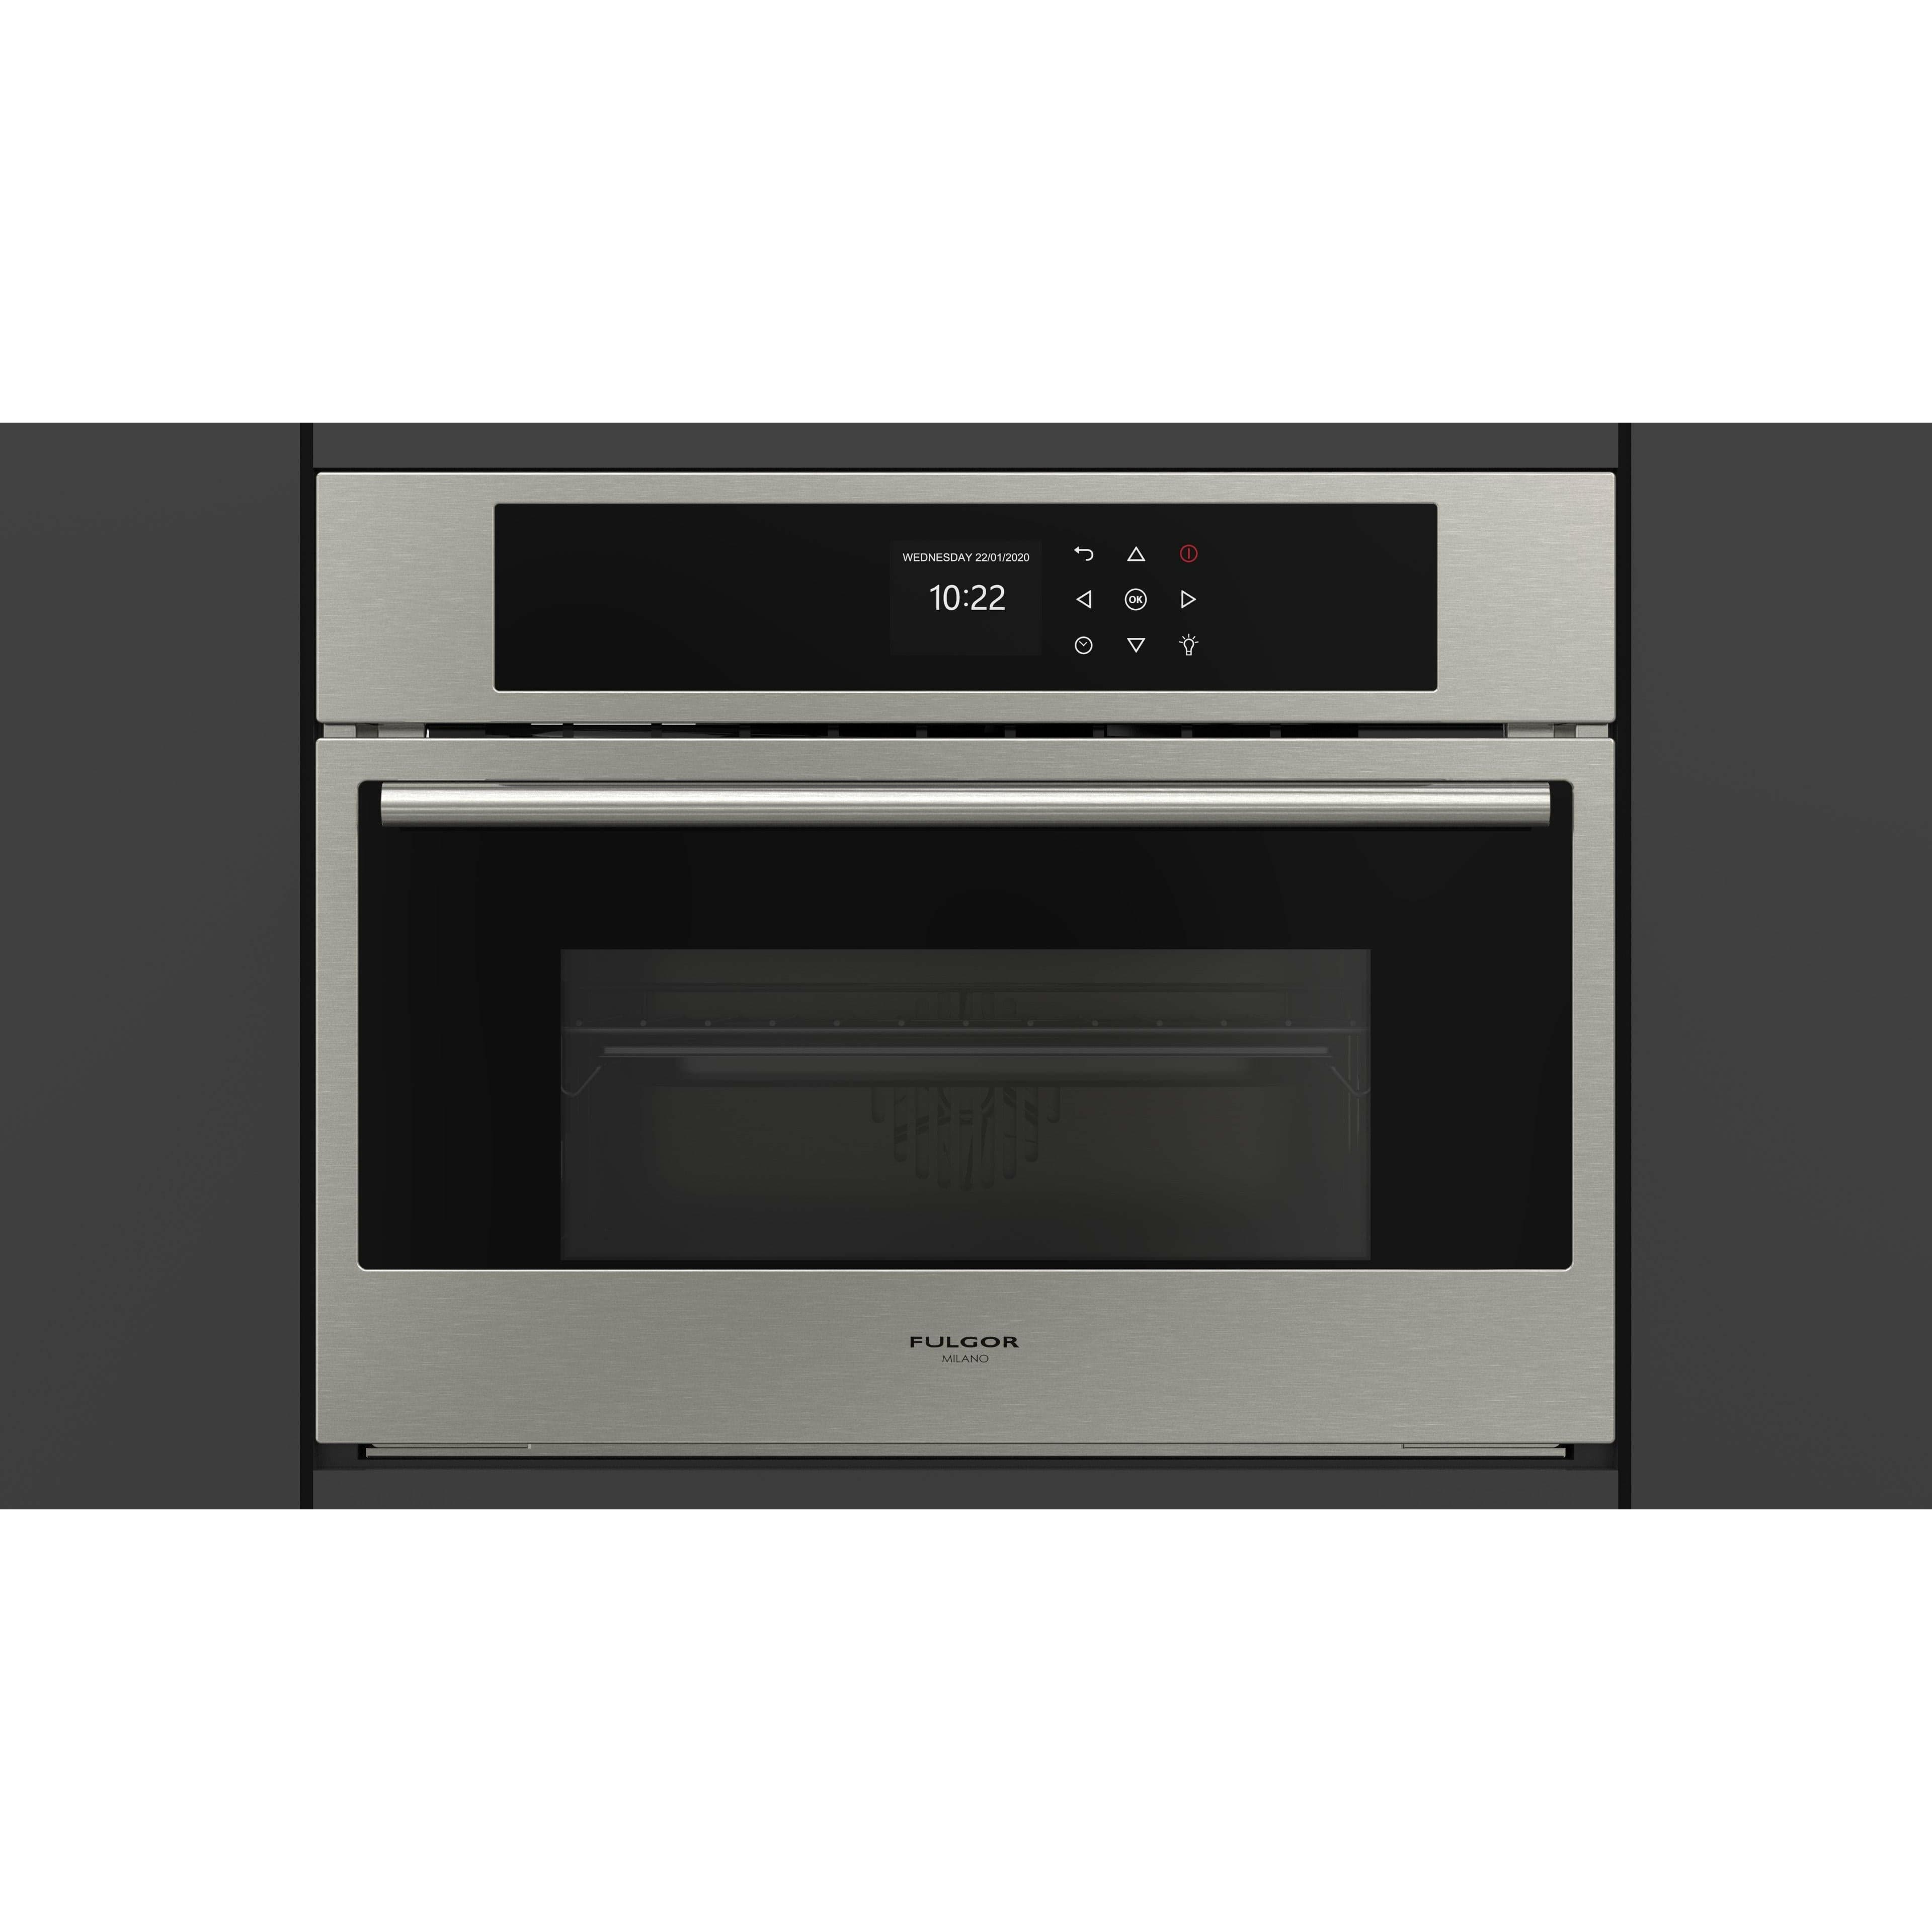 Fulgor Milano 24" Built-In Single Steam Wall Oven with Creactive Cooking System - F7SCO24S1 Wall Oven F7SCO24S1 Luxury Appliances Direct